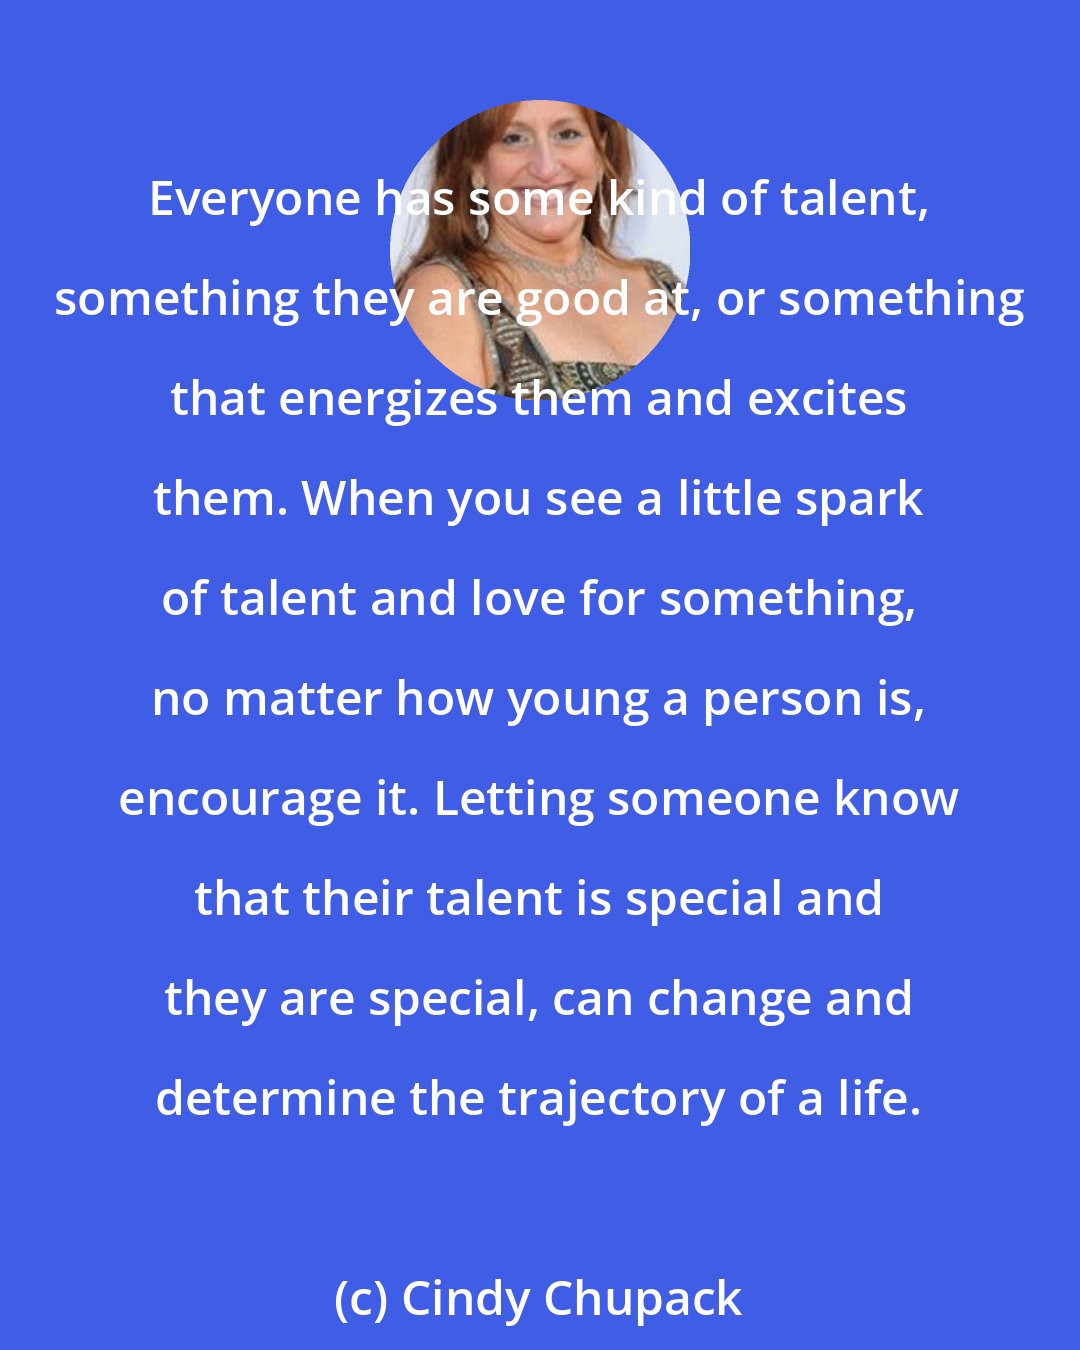 Cindy Chupack: Everyone has some kind of talent, something they are good at, or something that energizes them and excites them. When you see a little spark of talent and love for something, no matter how young a person is, encourage it. Letting someone know that their talent is special and they are special, can change and determine the trajectory of a life.